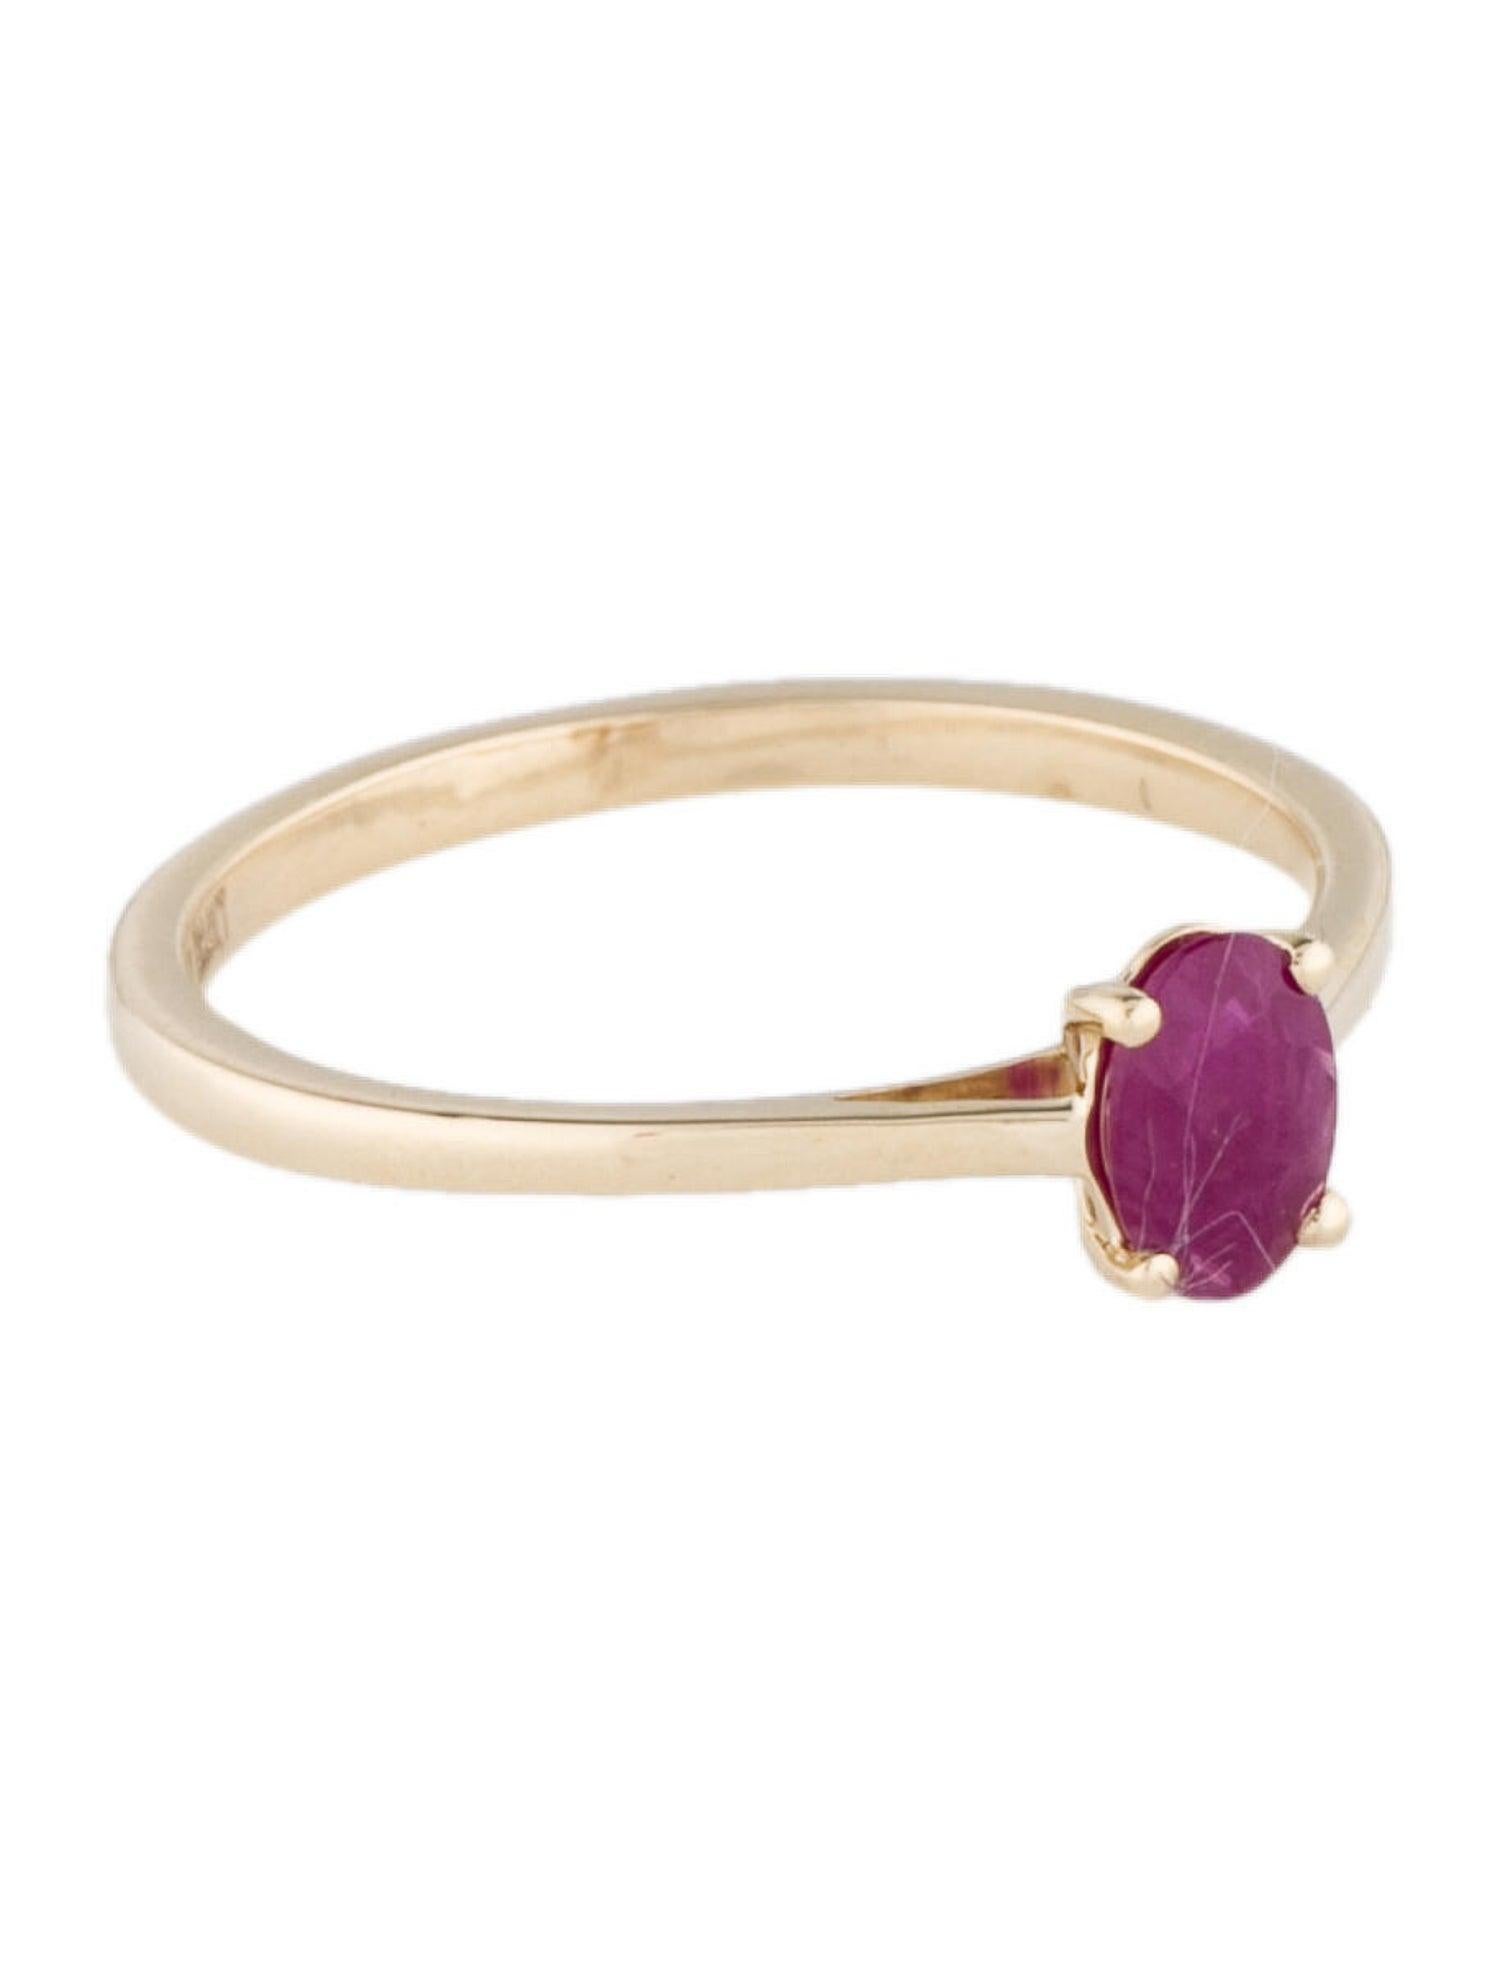 Evoke the fervor of nature's passionate blooms with our Blooms of Passion Ruby Oval Ring. Immerse yourself in the rich legacy of Jeweltique, where nature's beauty is transformed into timeless pieces of art. This exquisite ring, a part of our